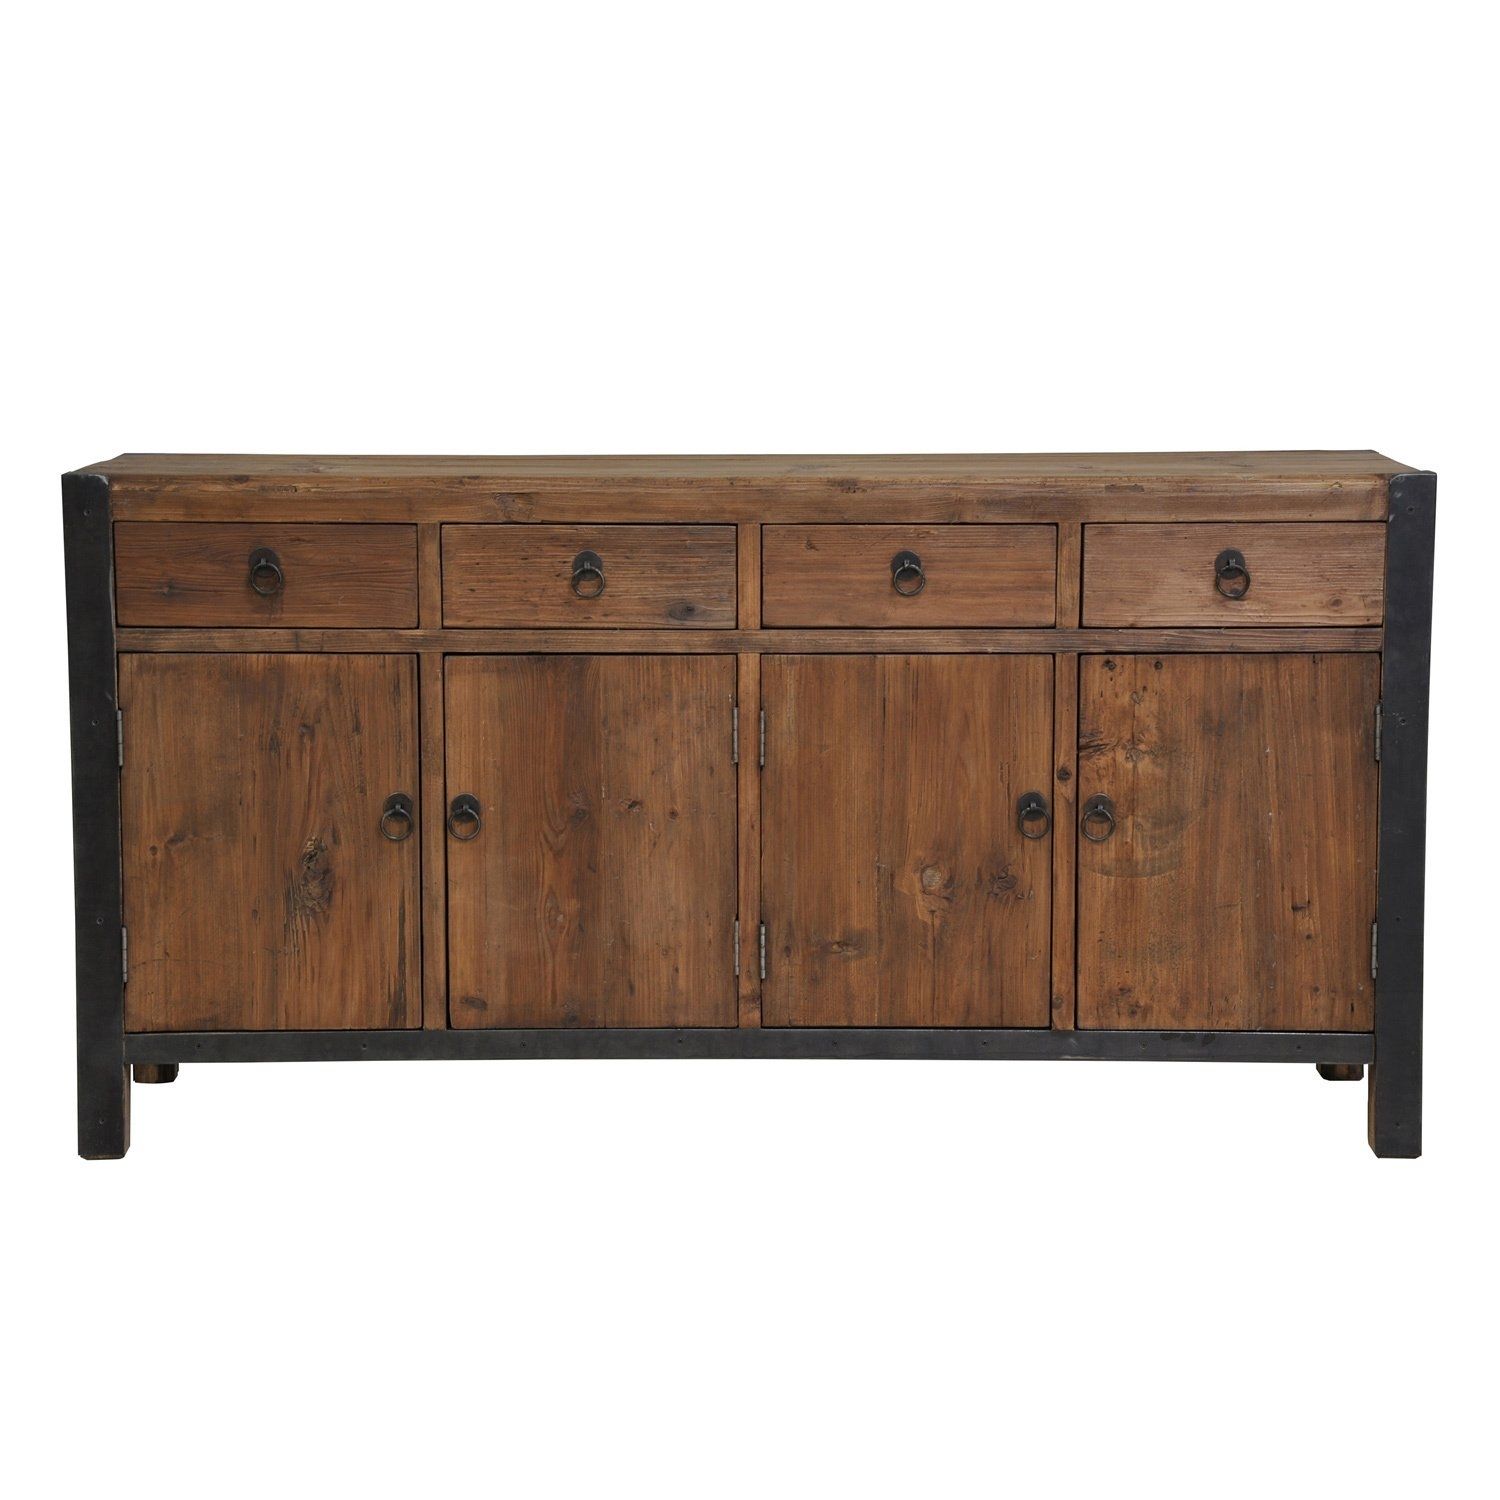 Shop Willow Reclaimed Wood And Iron 70 Inch Buffetkosas Home With Reclaimed Pine &amp; Iron 72 Inch Sideboards (View 6 of 30)